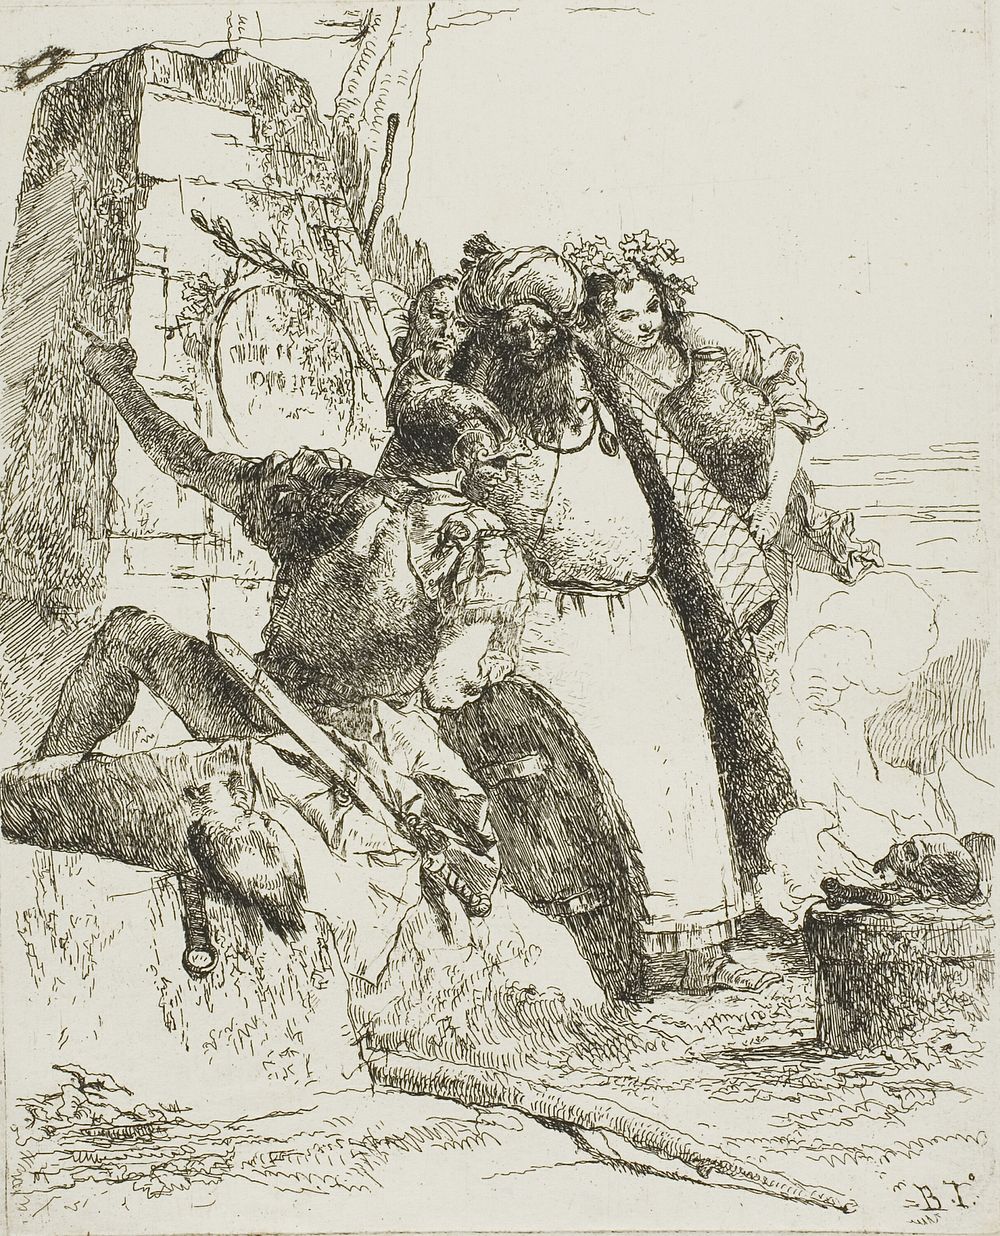 A Magician, A Soldier, and Three Figures Watching a Burning Skull, from Scherzi by Giambattista Tiepolo